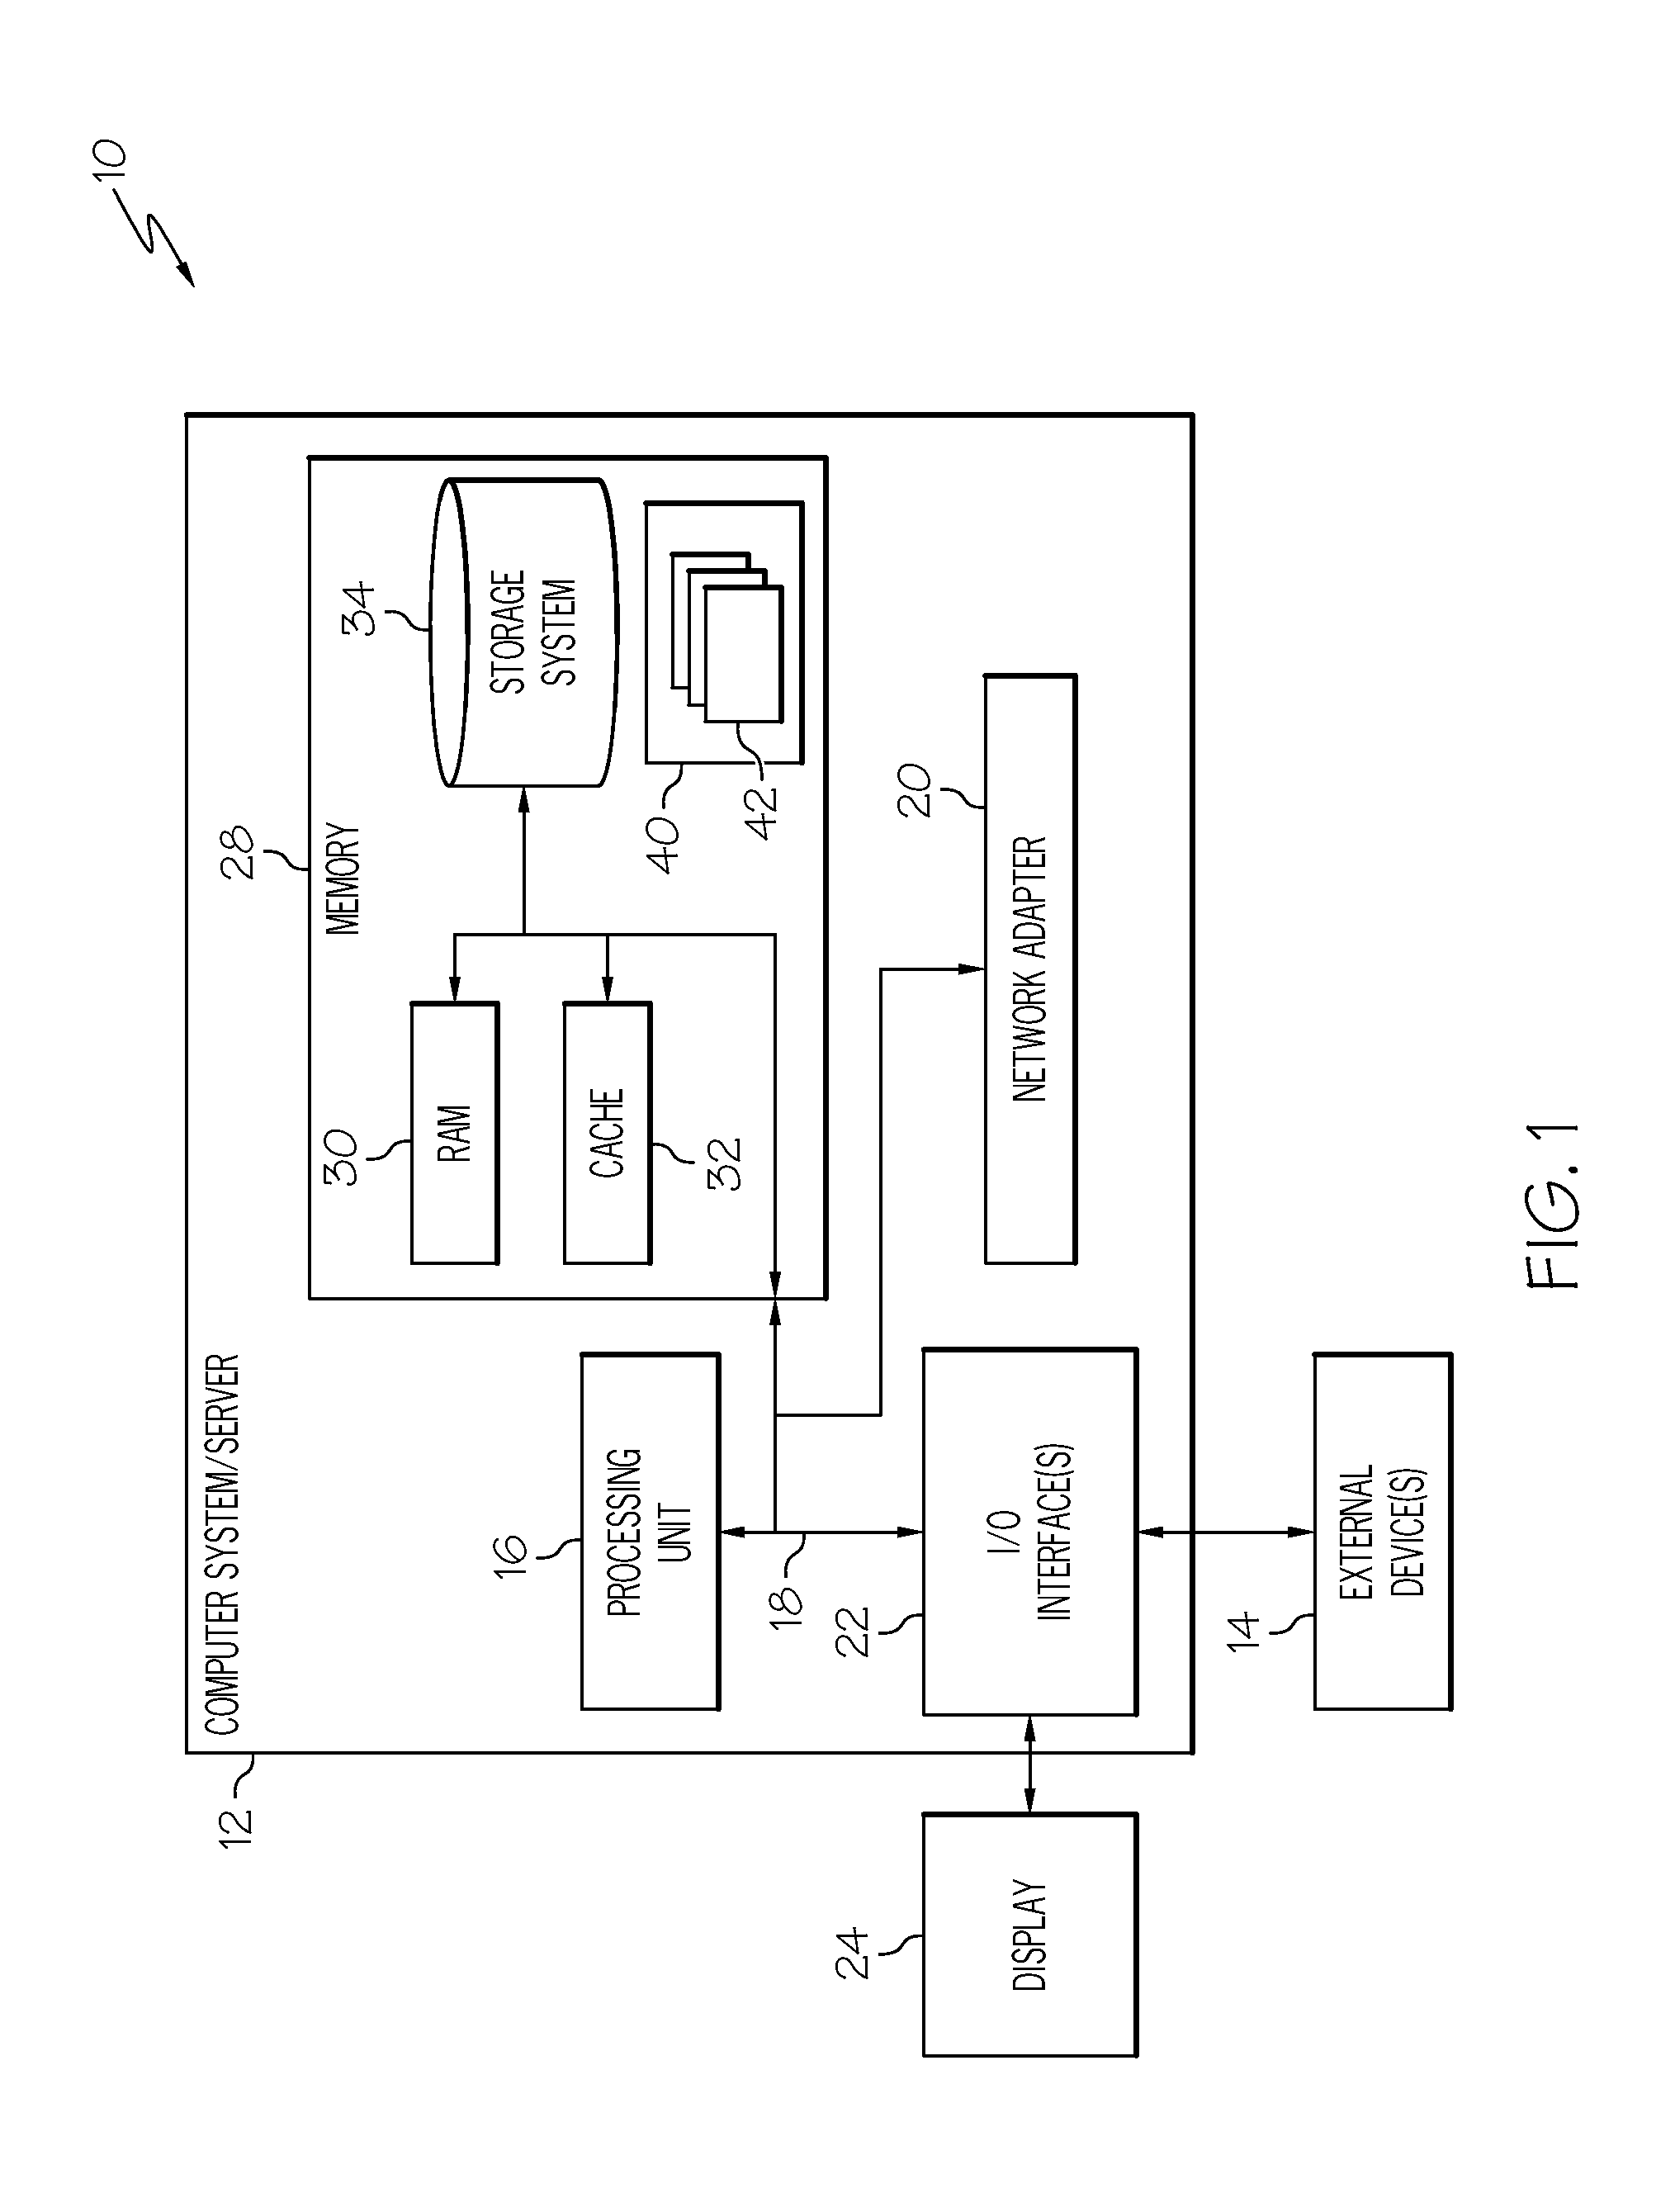 System, method and program product for optimizing virtual machine placement and configuration